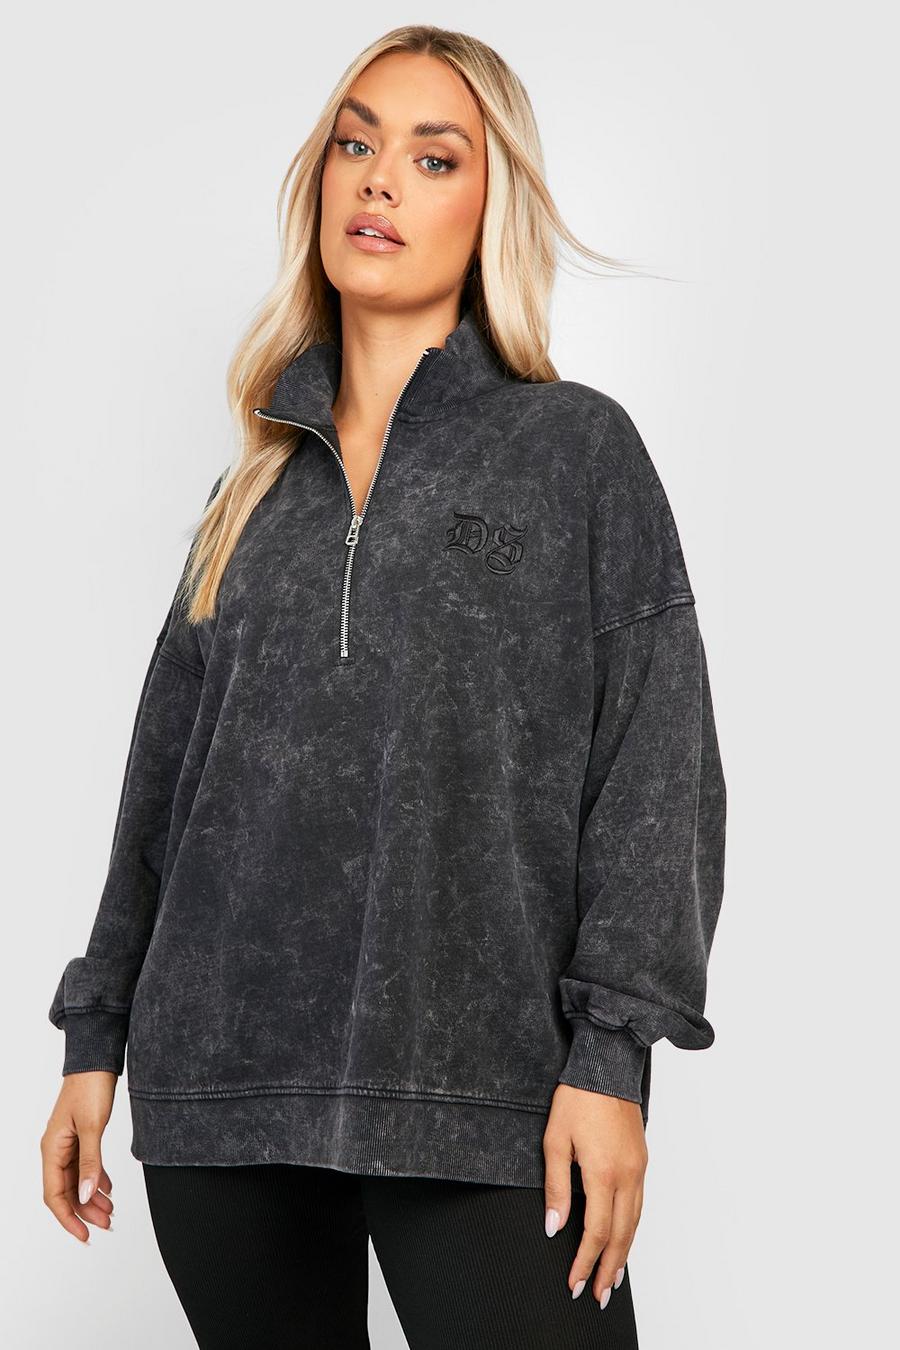 Charcoal gris Plus Acid Wash Embroidered Half Zip Sweater